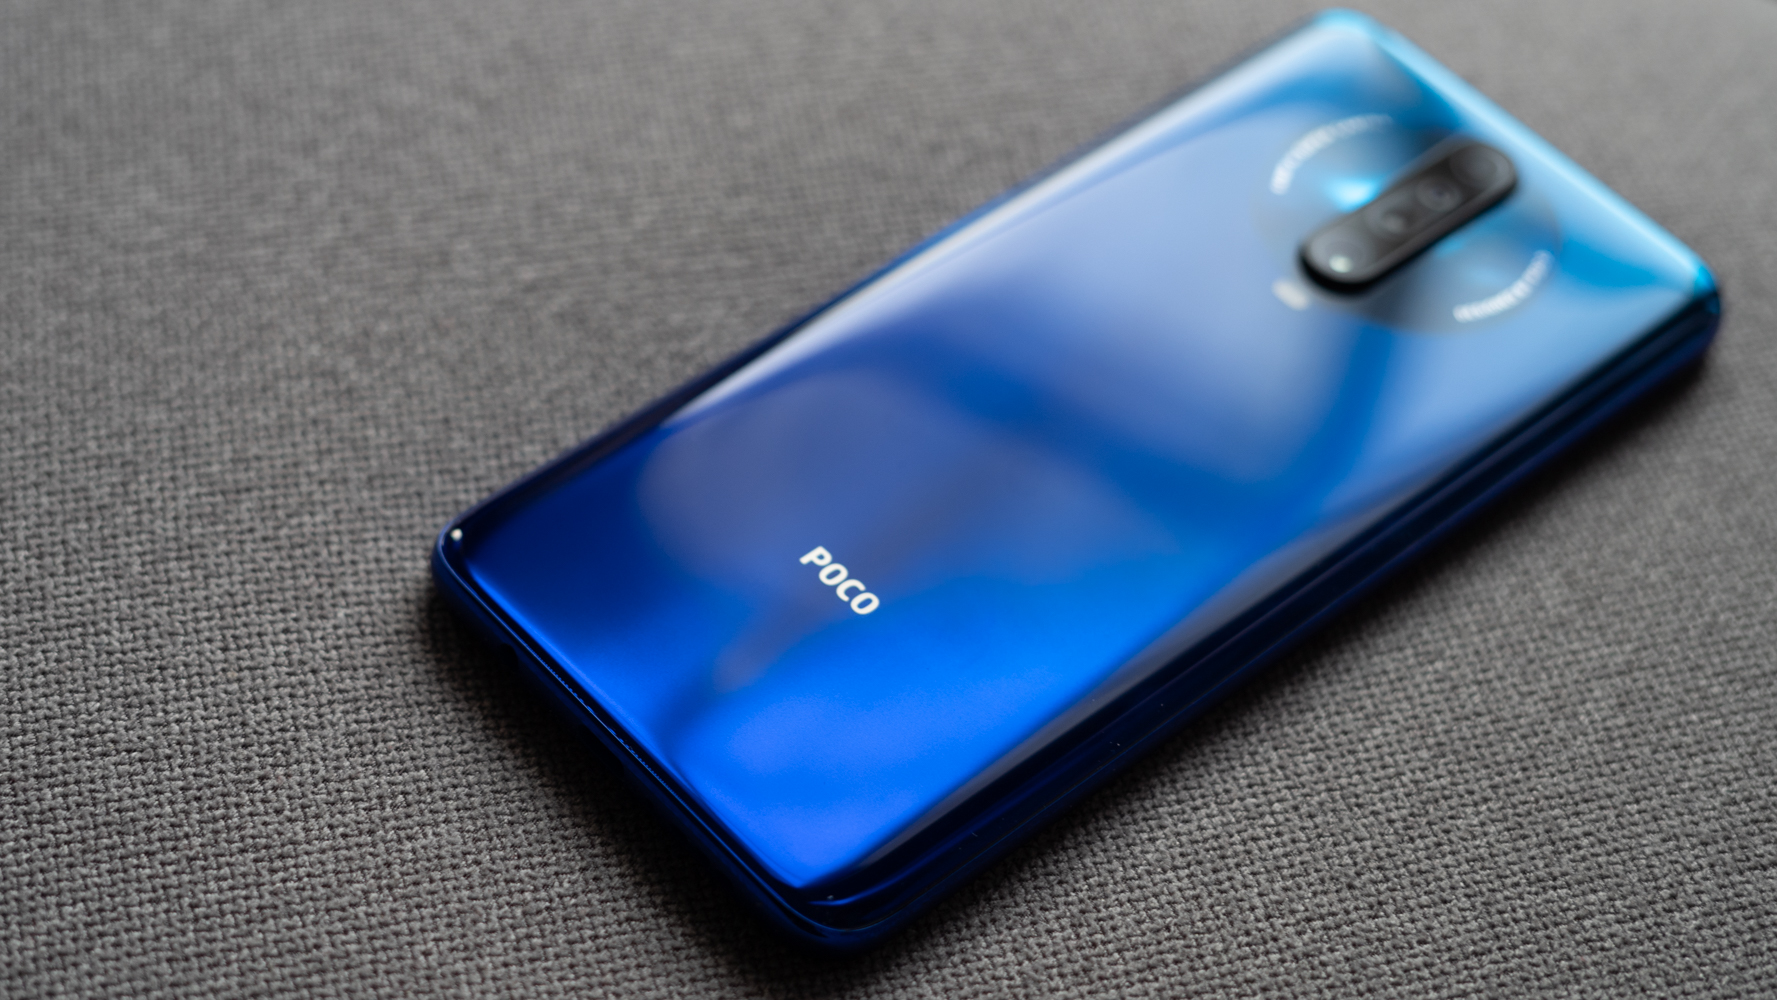 The Poco X2 was a rebranded Redmi K30, but what about the Poco F2?